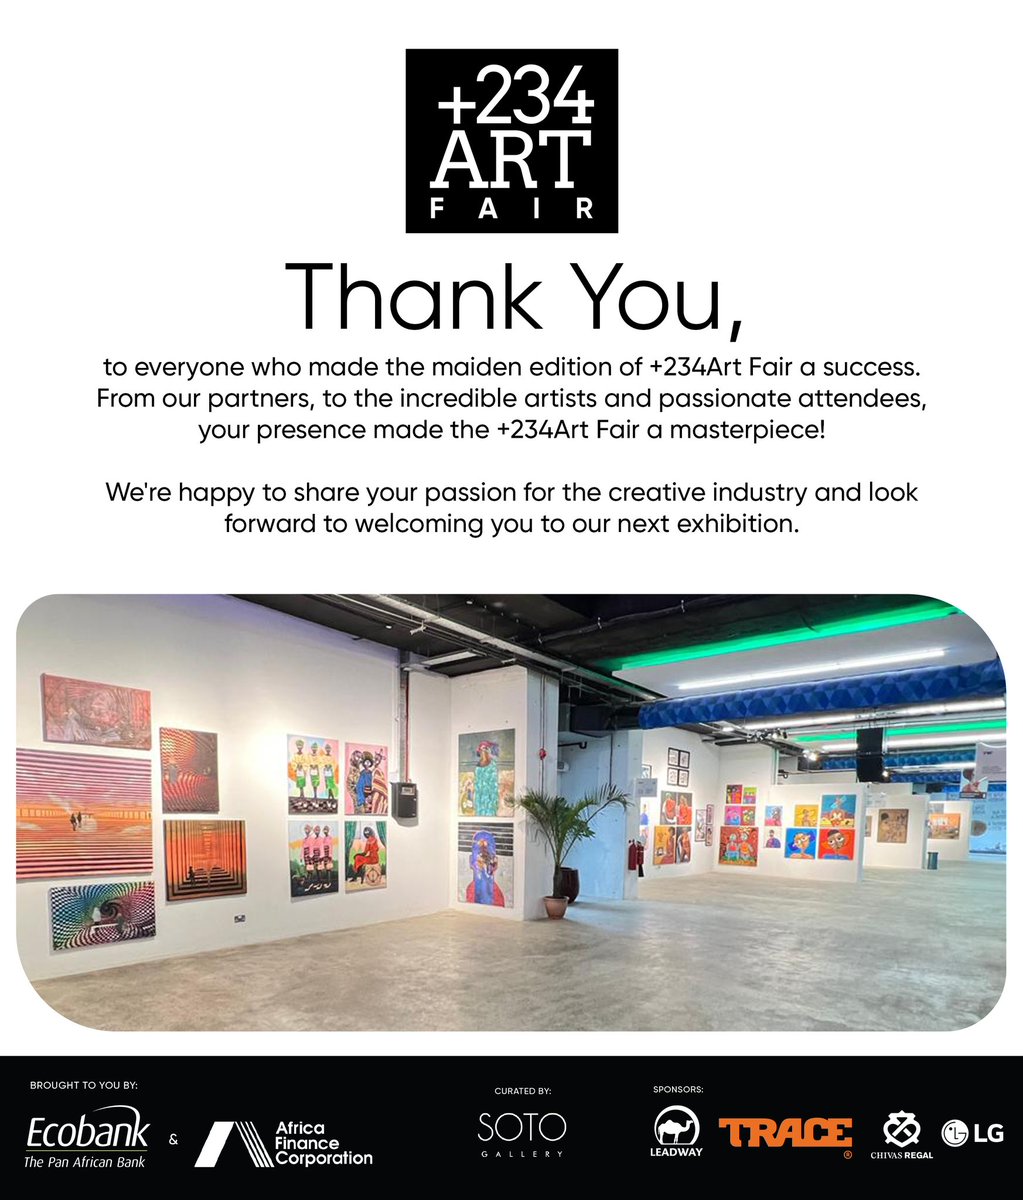 A heartfelt thank you to everyone who joined us for the inaugural +234Art Fair! 🎉 Your presence made each day shine brighter with creativity and connection. Together, we ignited a new chapter in the Nigerian art scene. Cheers to the beginning of a remarkable artistic journey…